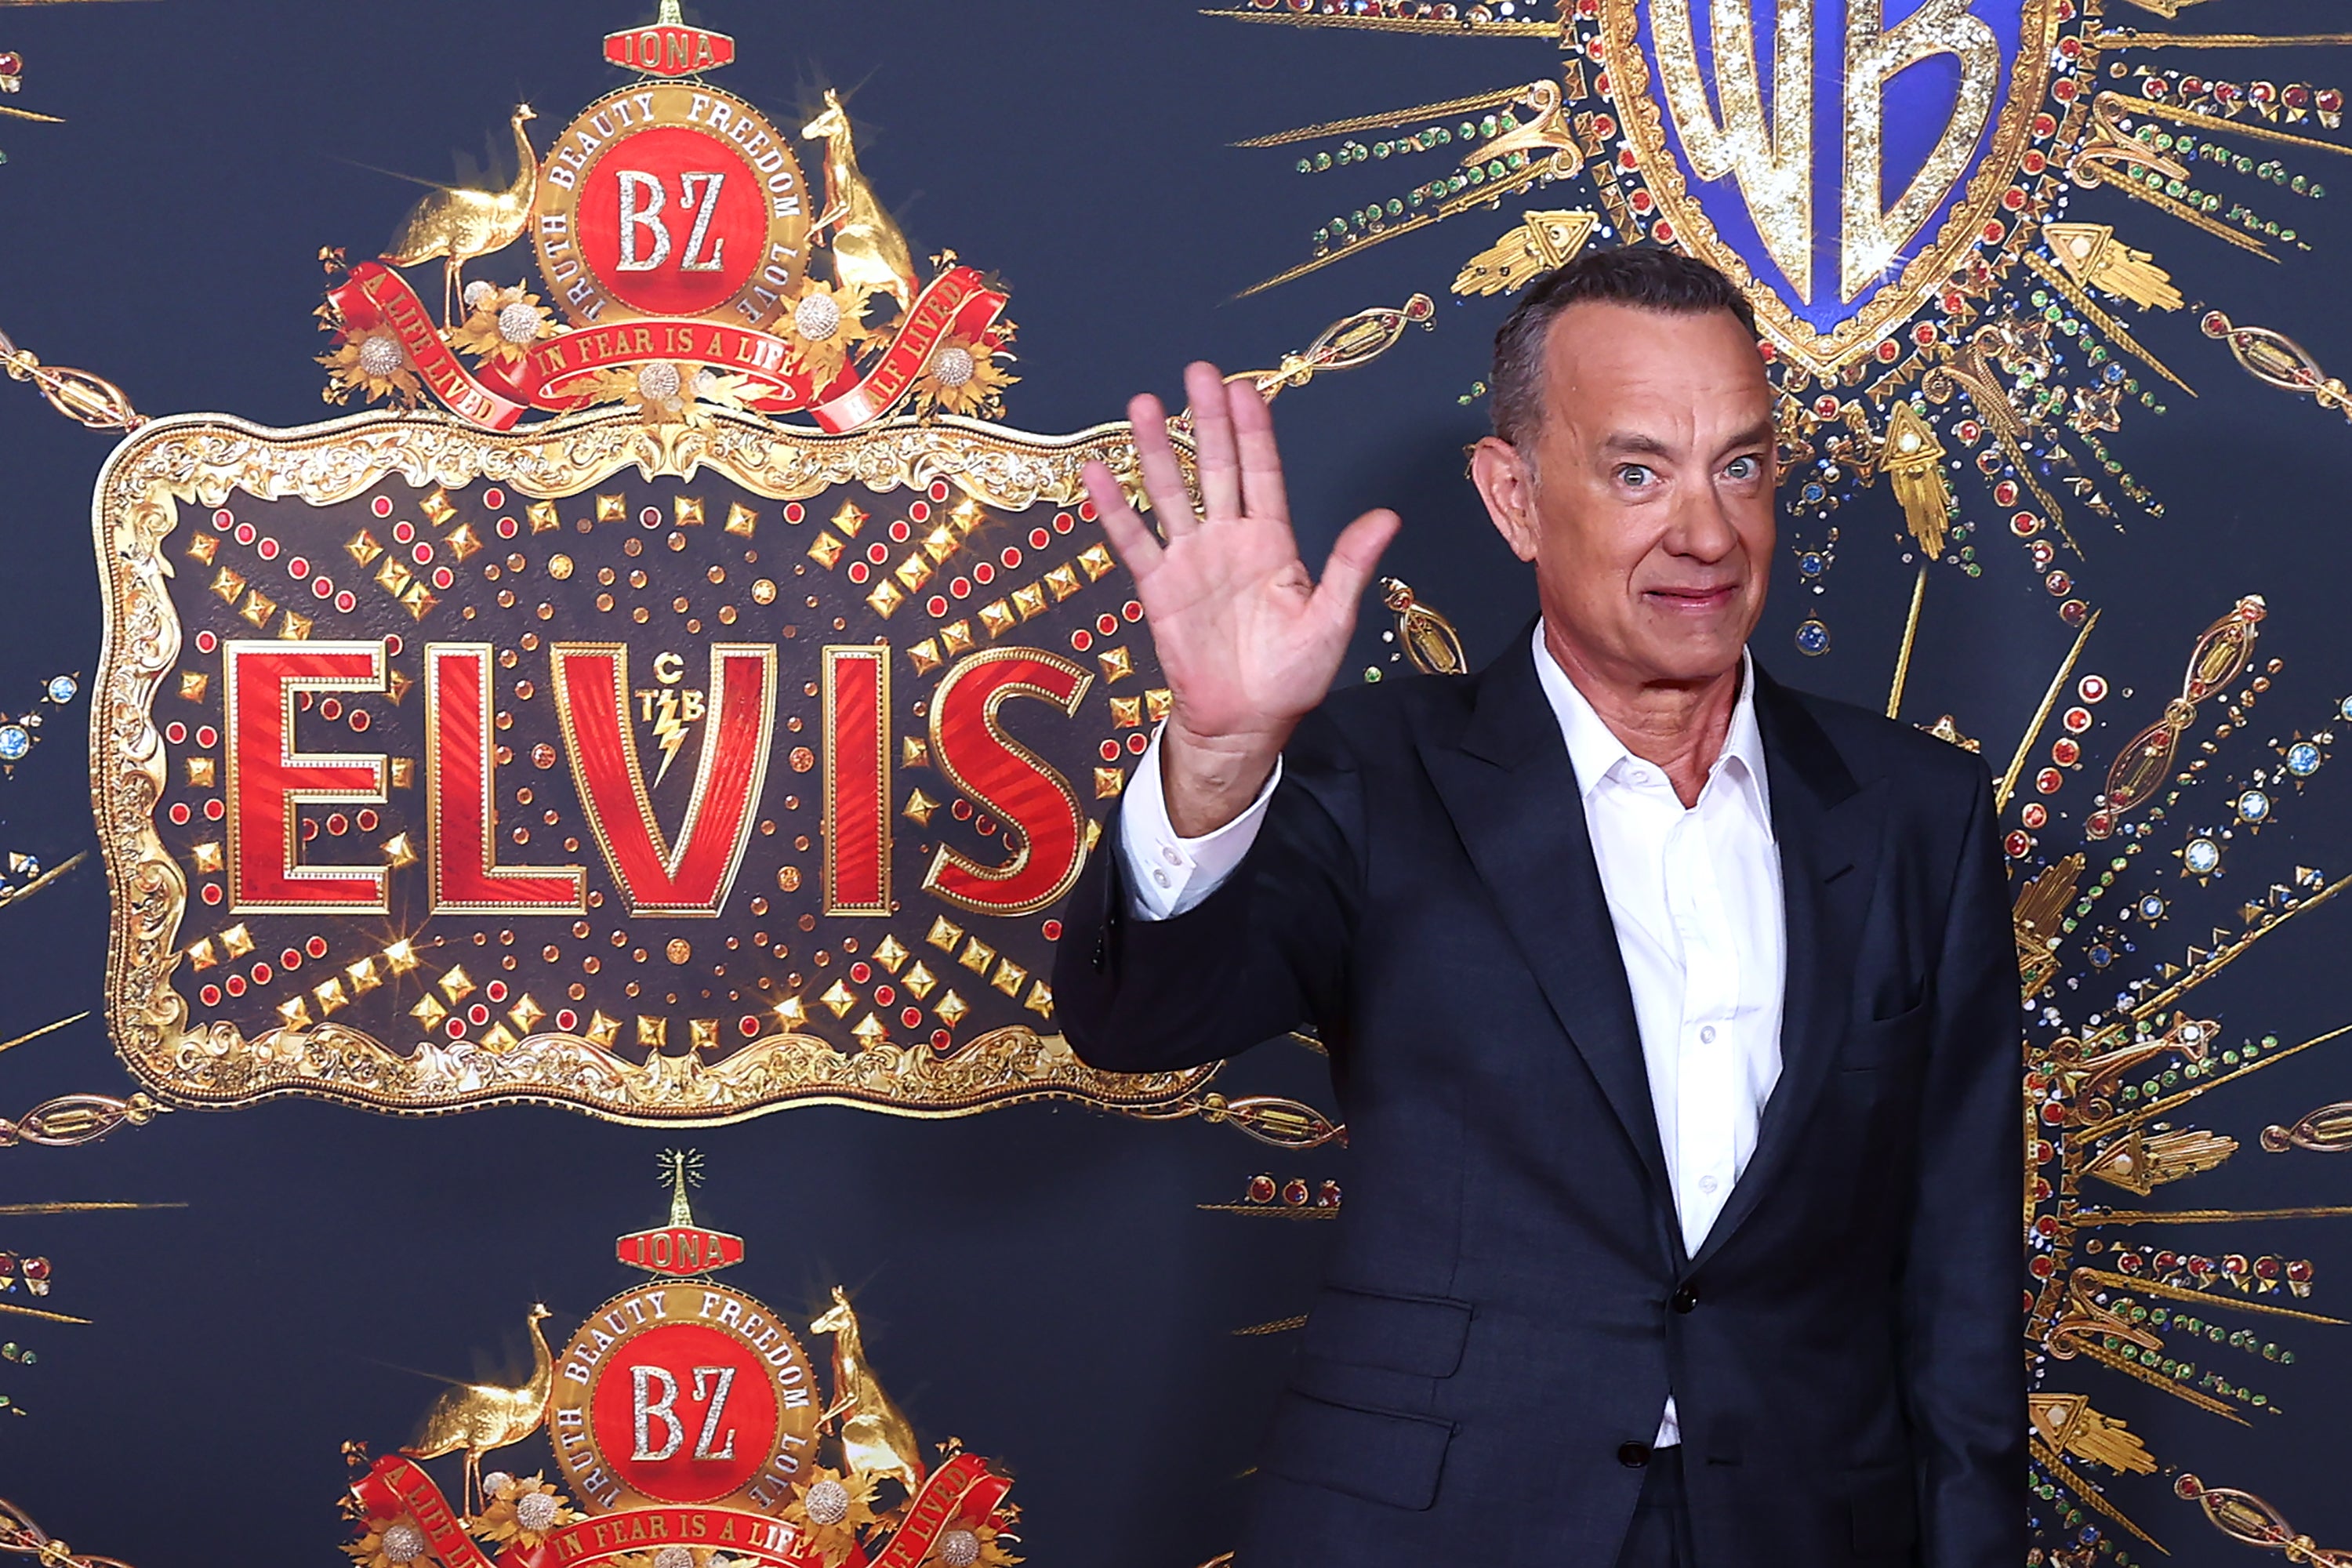 Hanks said talks about reprising the film fell through after 40 minutes